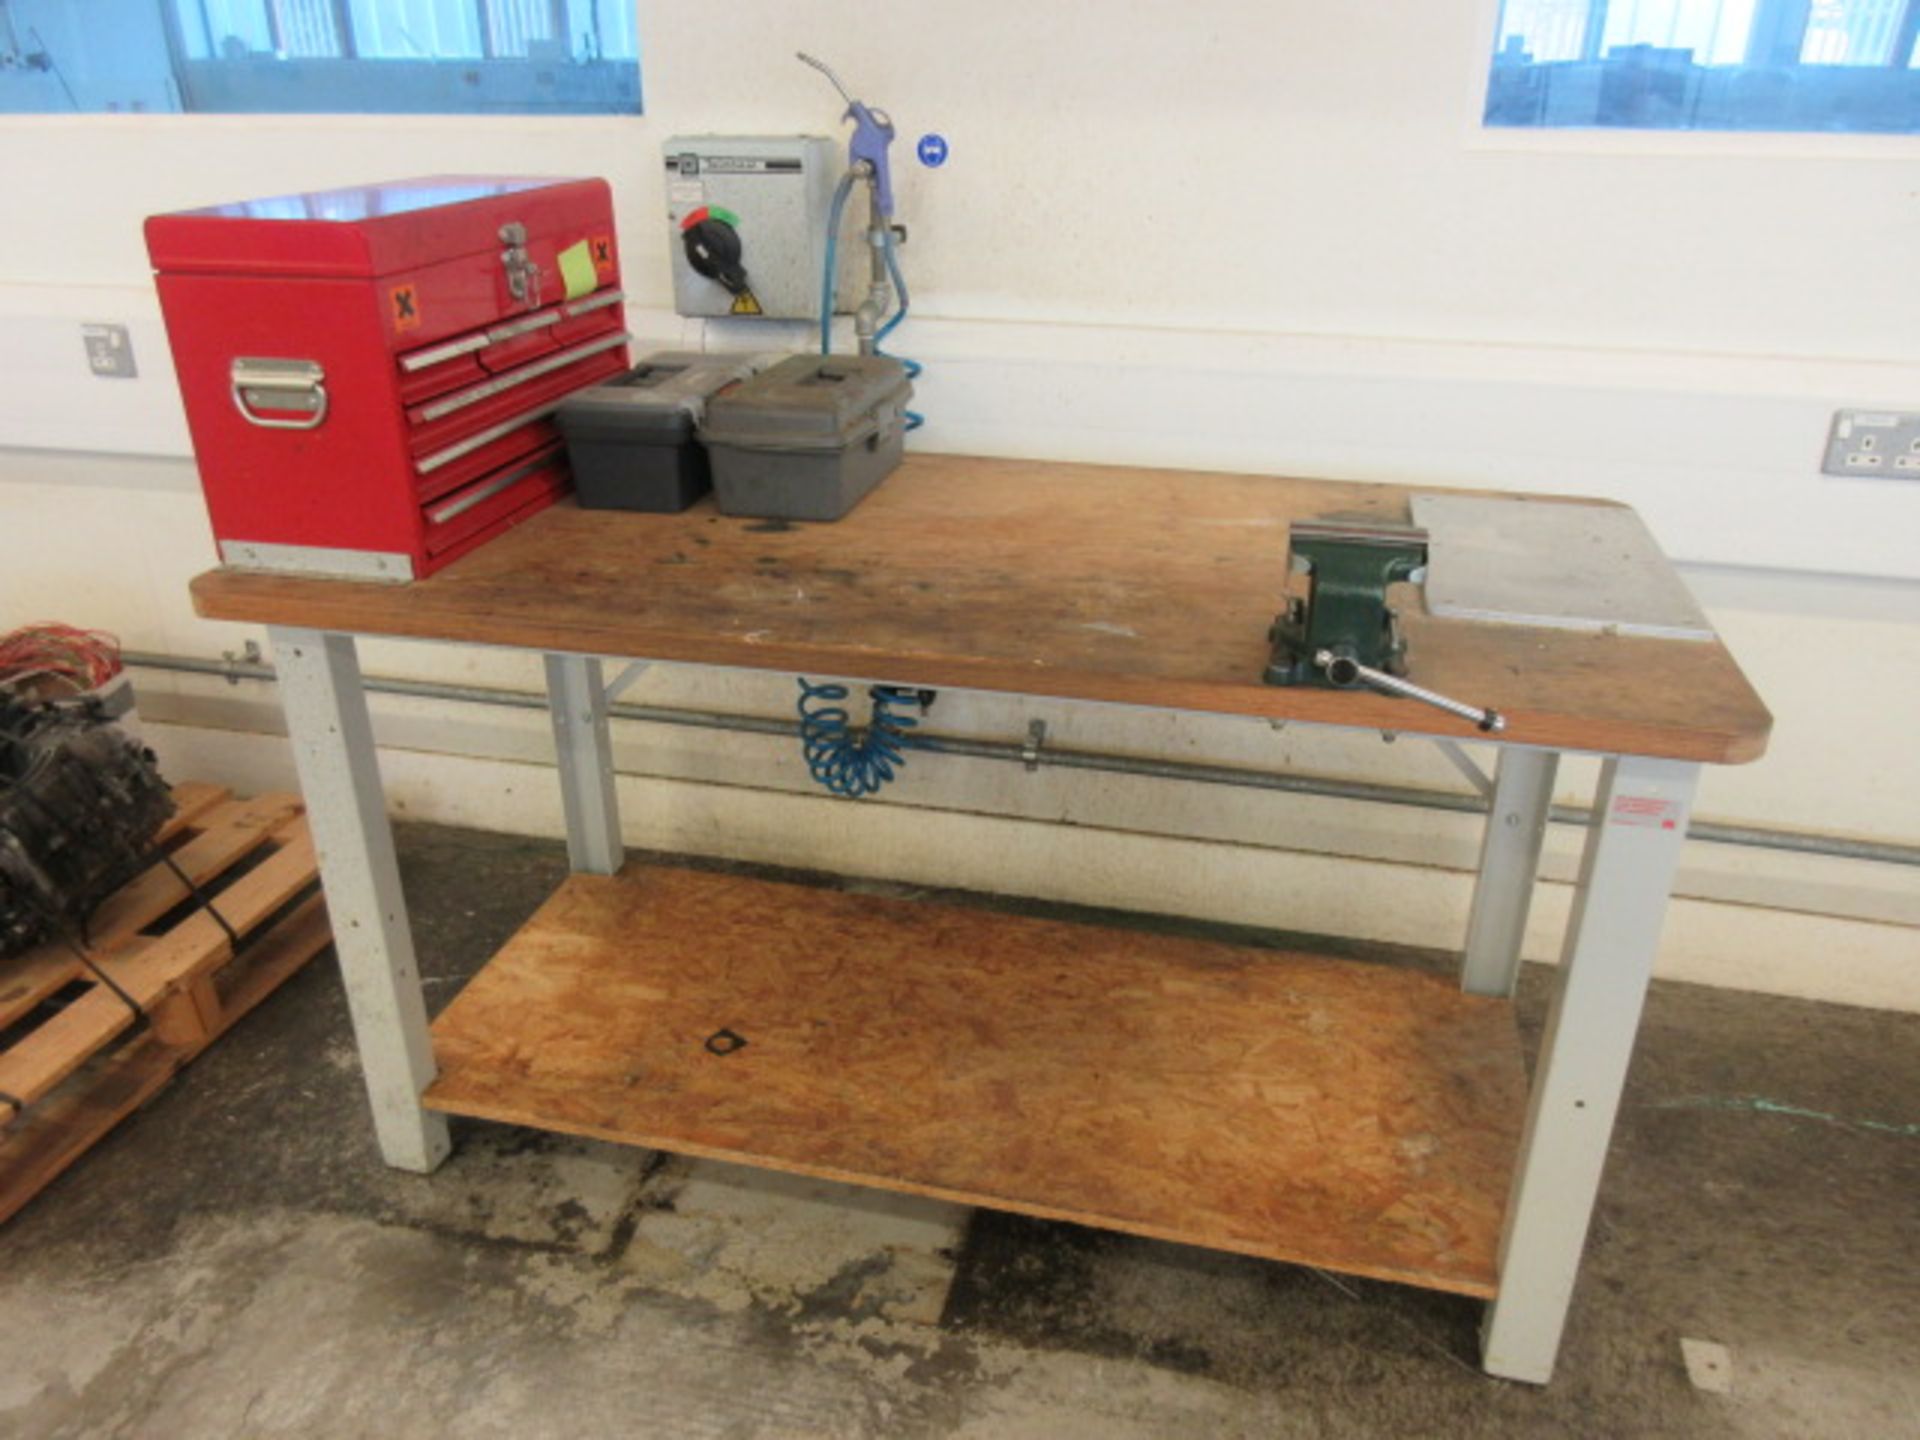 RS STEEL FRAMED WOODEN TOP BENCH WITH SWIVEL BASE 4'' ENGINEERS VICE & MULTI DRAW TOOL BOX